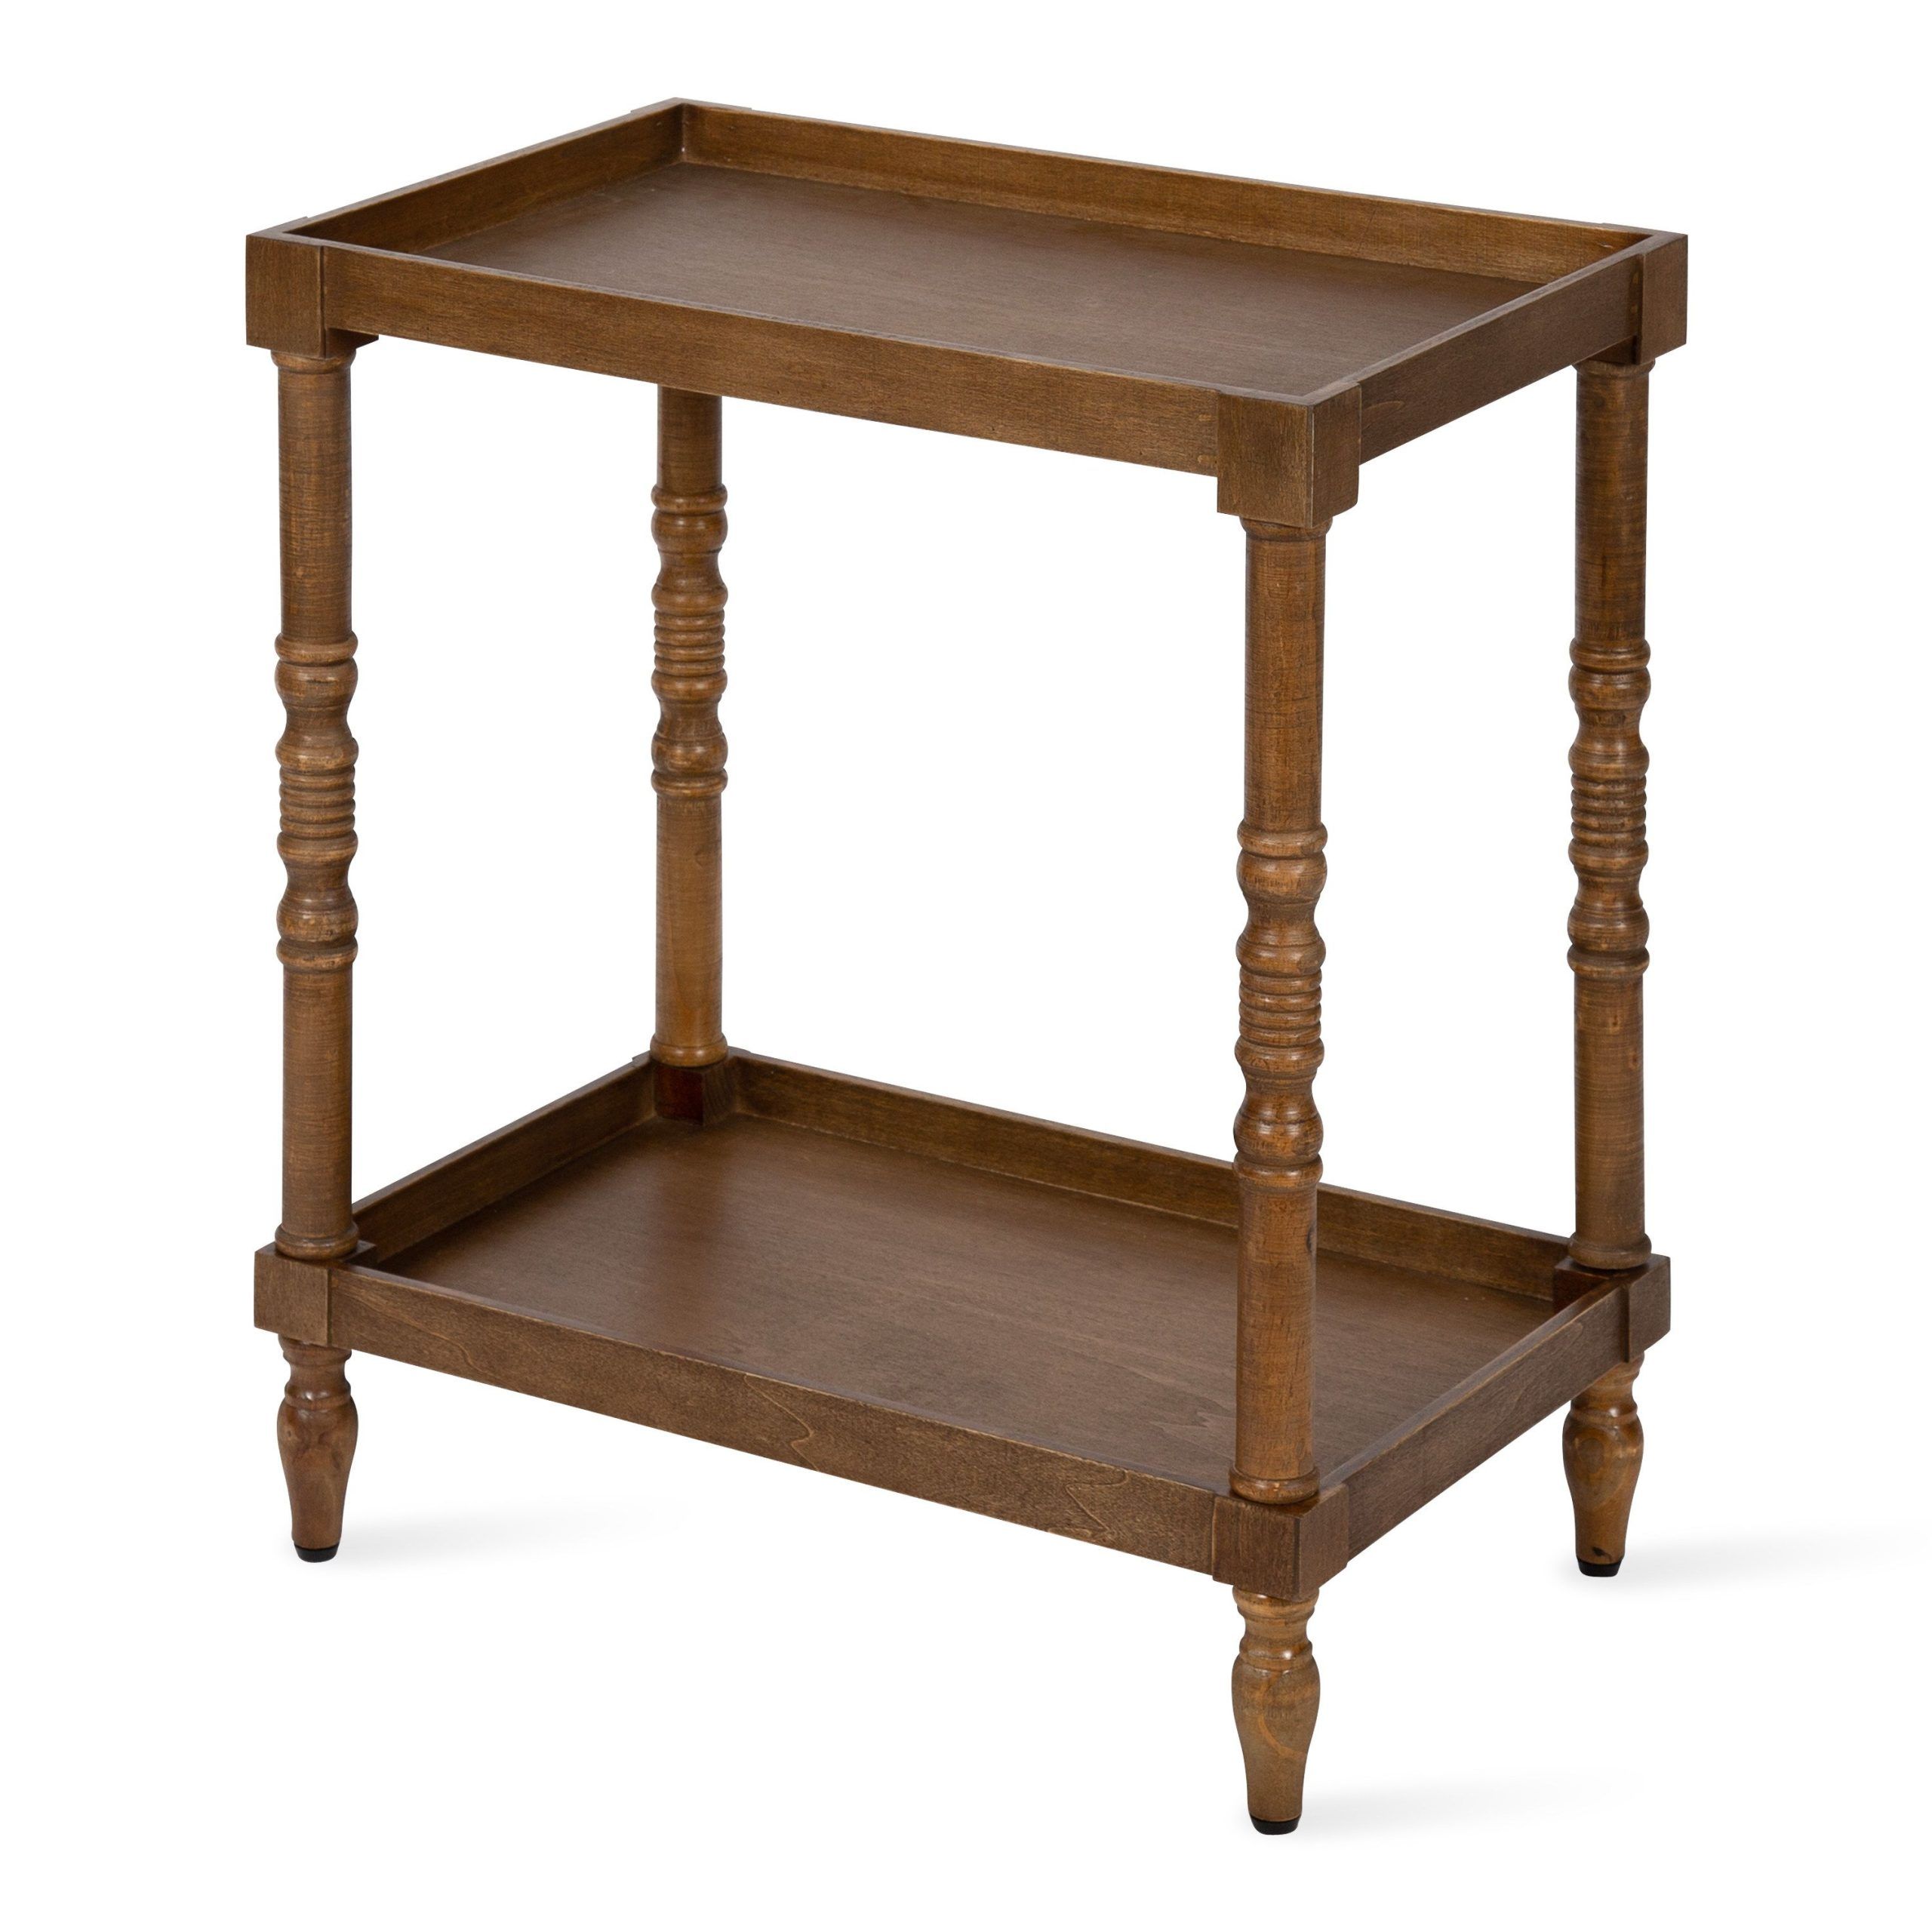 Preferred Kate And Laurel Bellport Farmhouse Drink Tables Pertaining To Kate And Laurel Bellport Farmhouse Side Table, 22 X 14 X 26, Rustic (View 11 of 15)